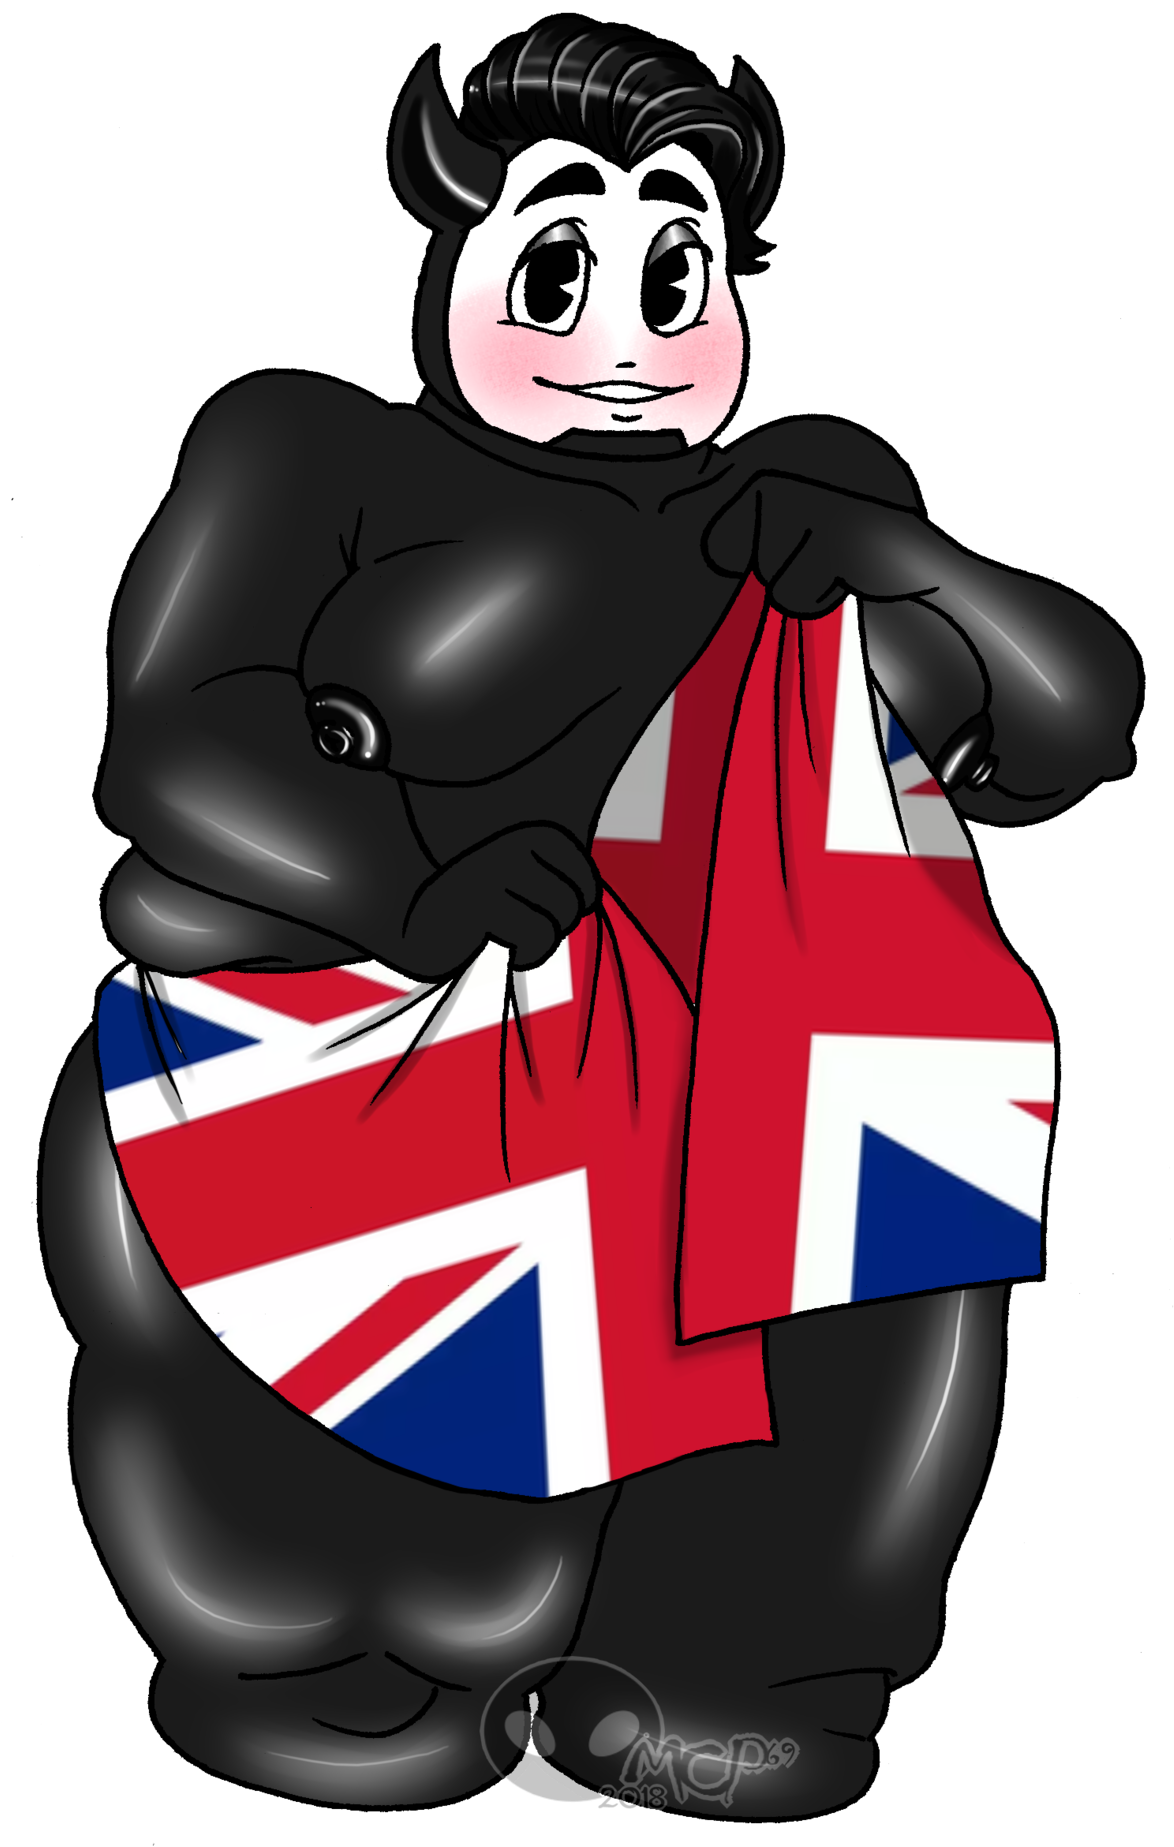 “ Commissions For Big Ben @askbigben They Asked For - Cartoon (1193x1920)